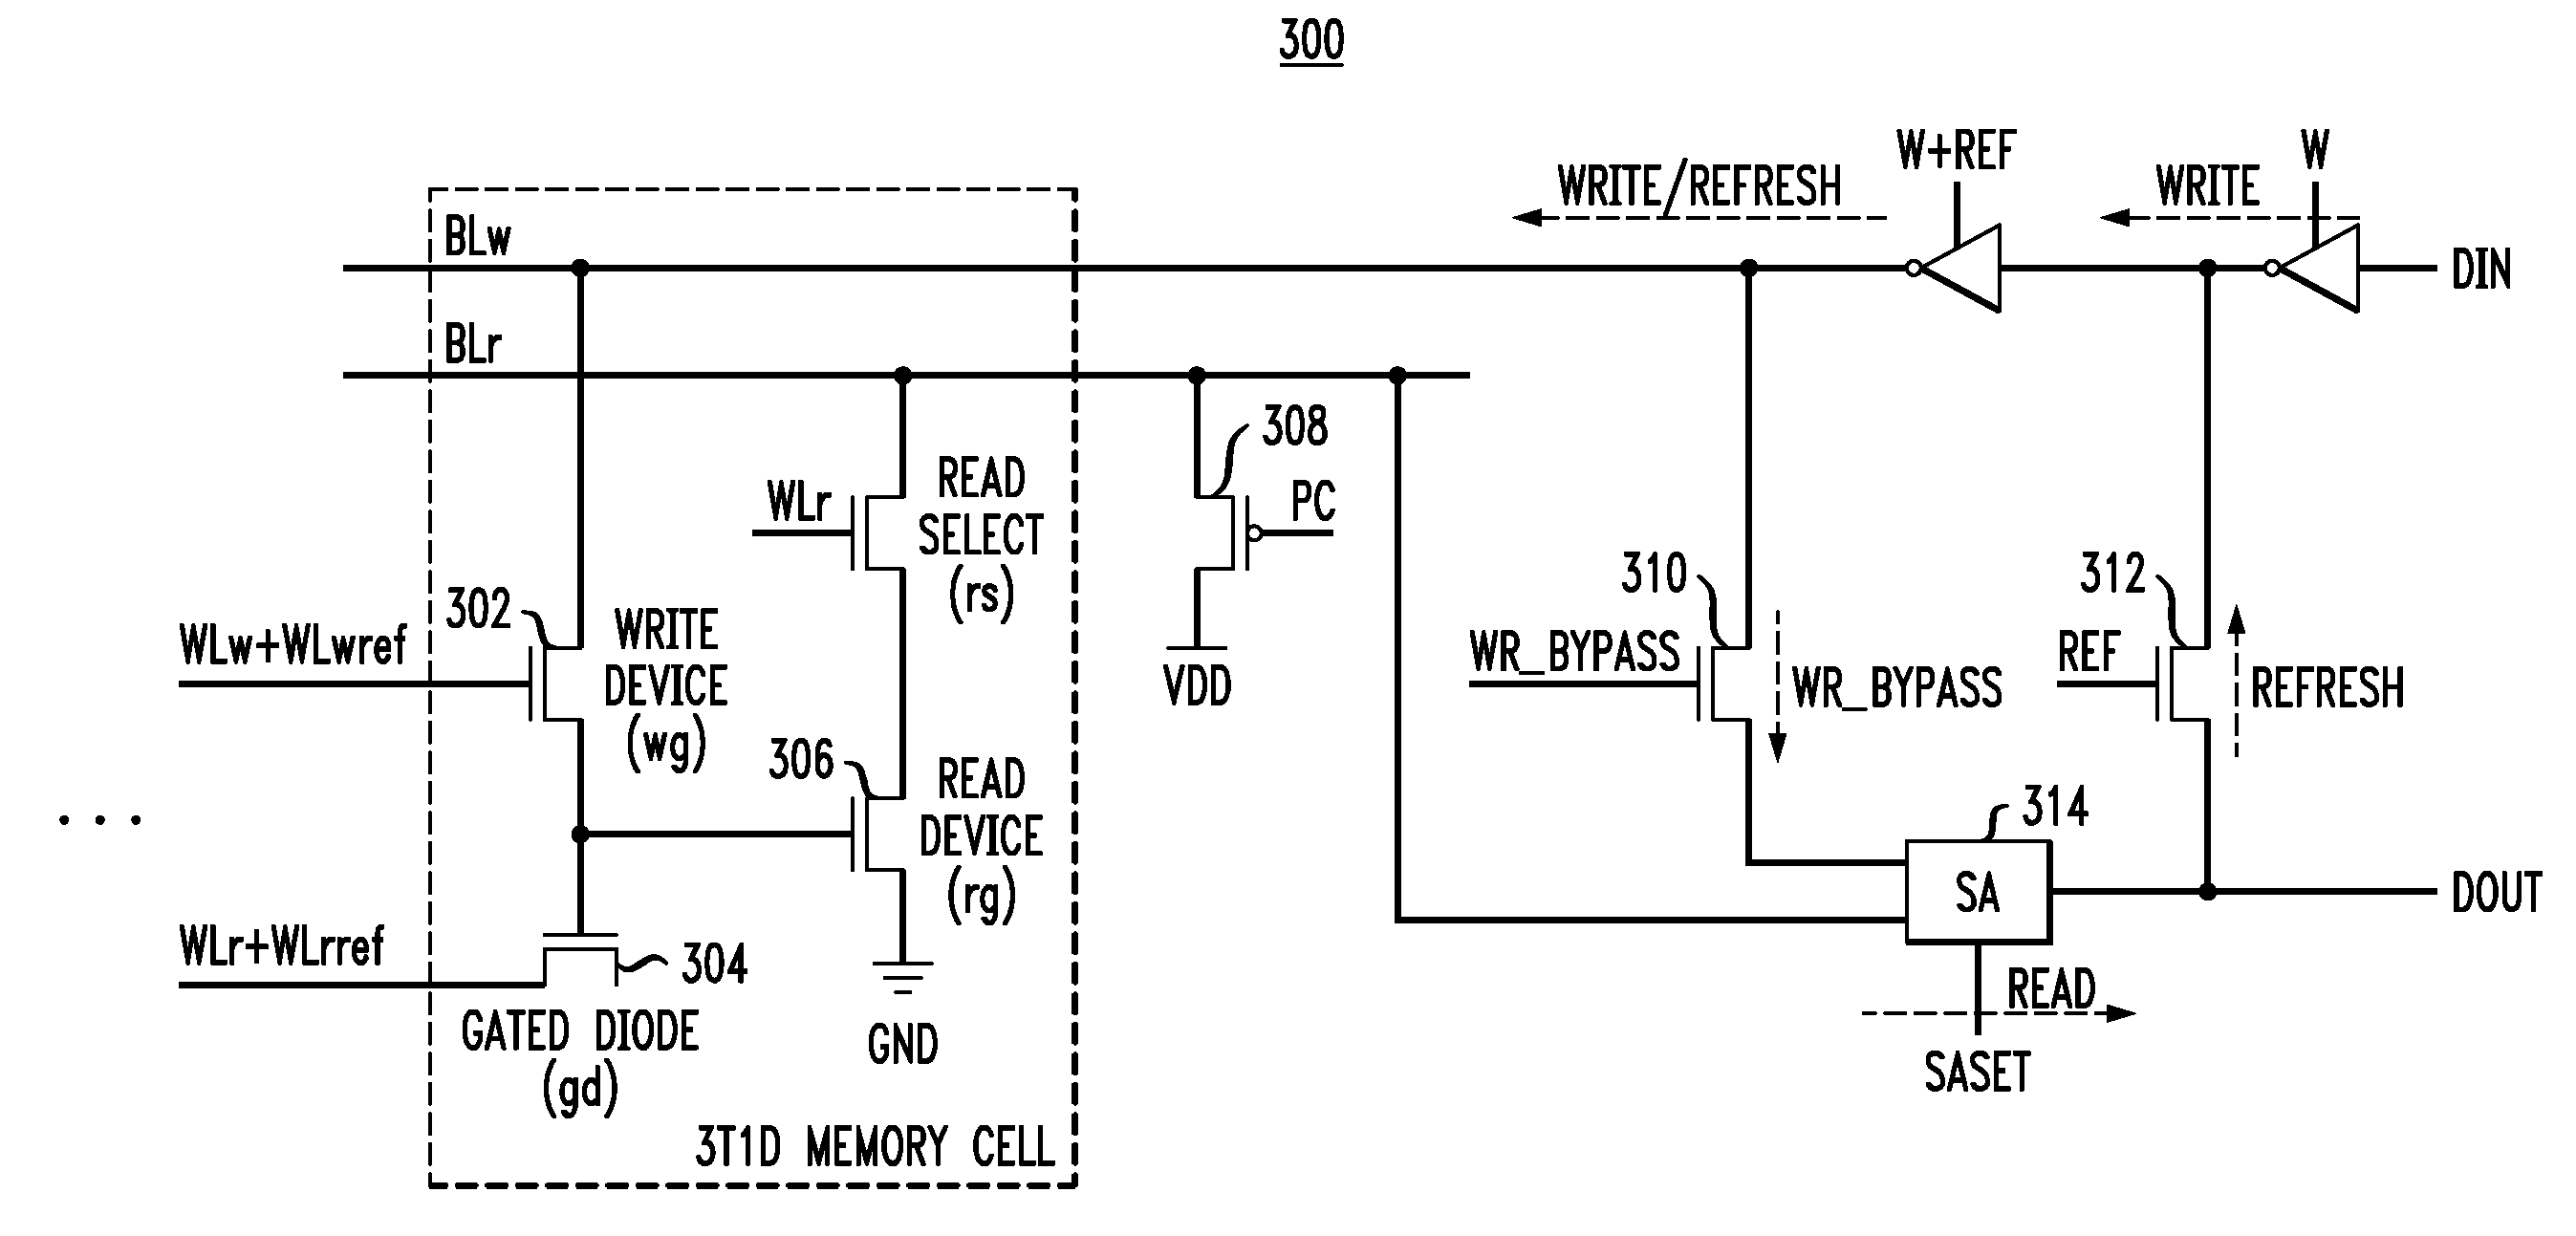 Multi-port dynamic memory structures